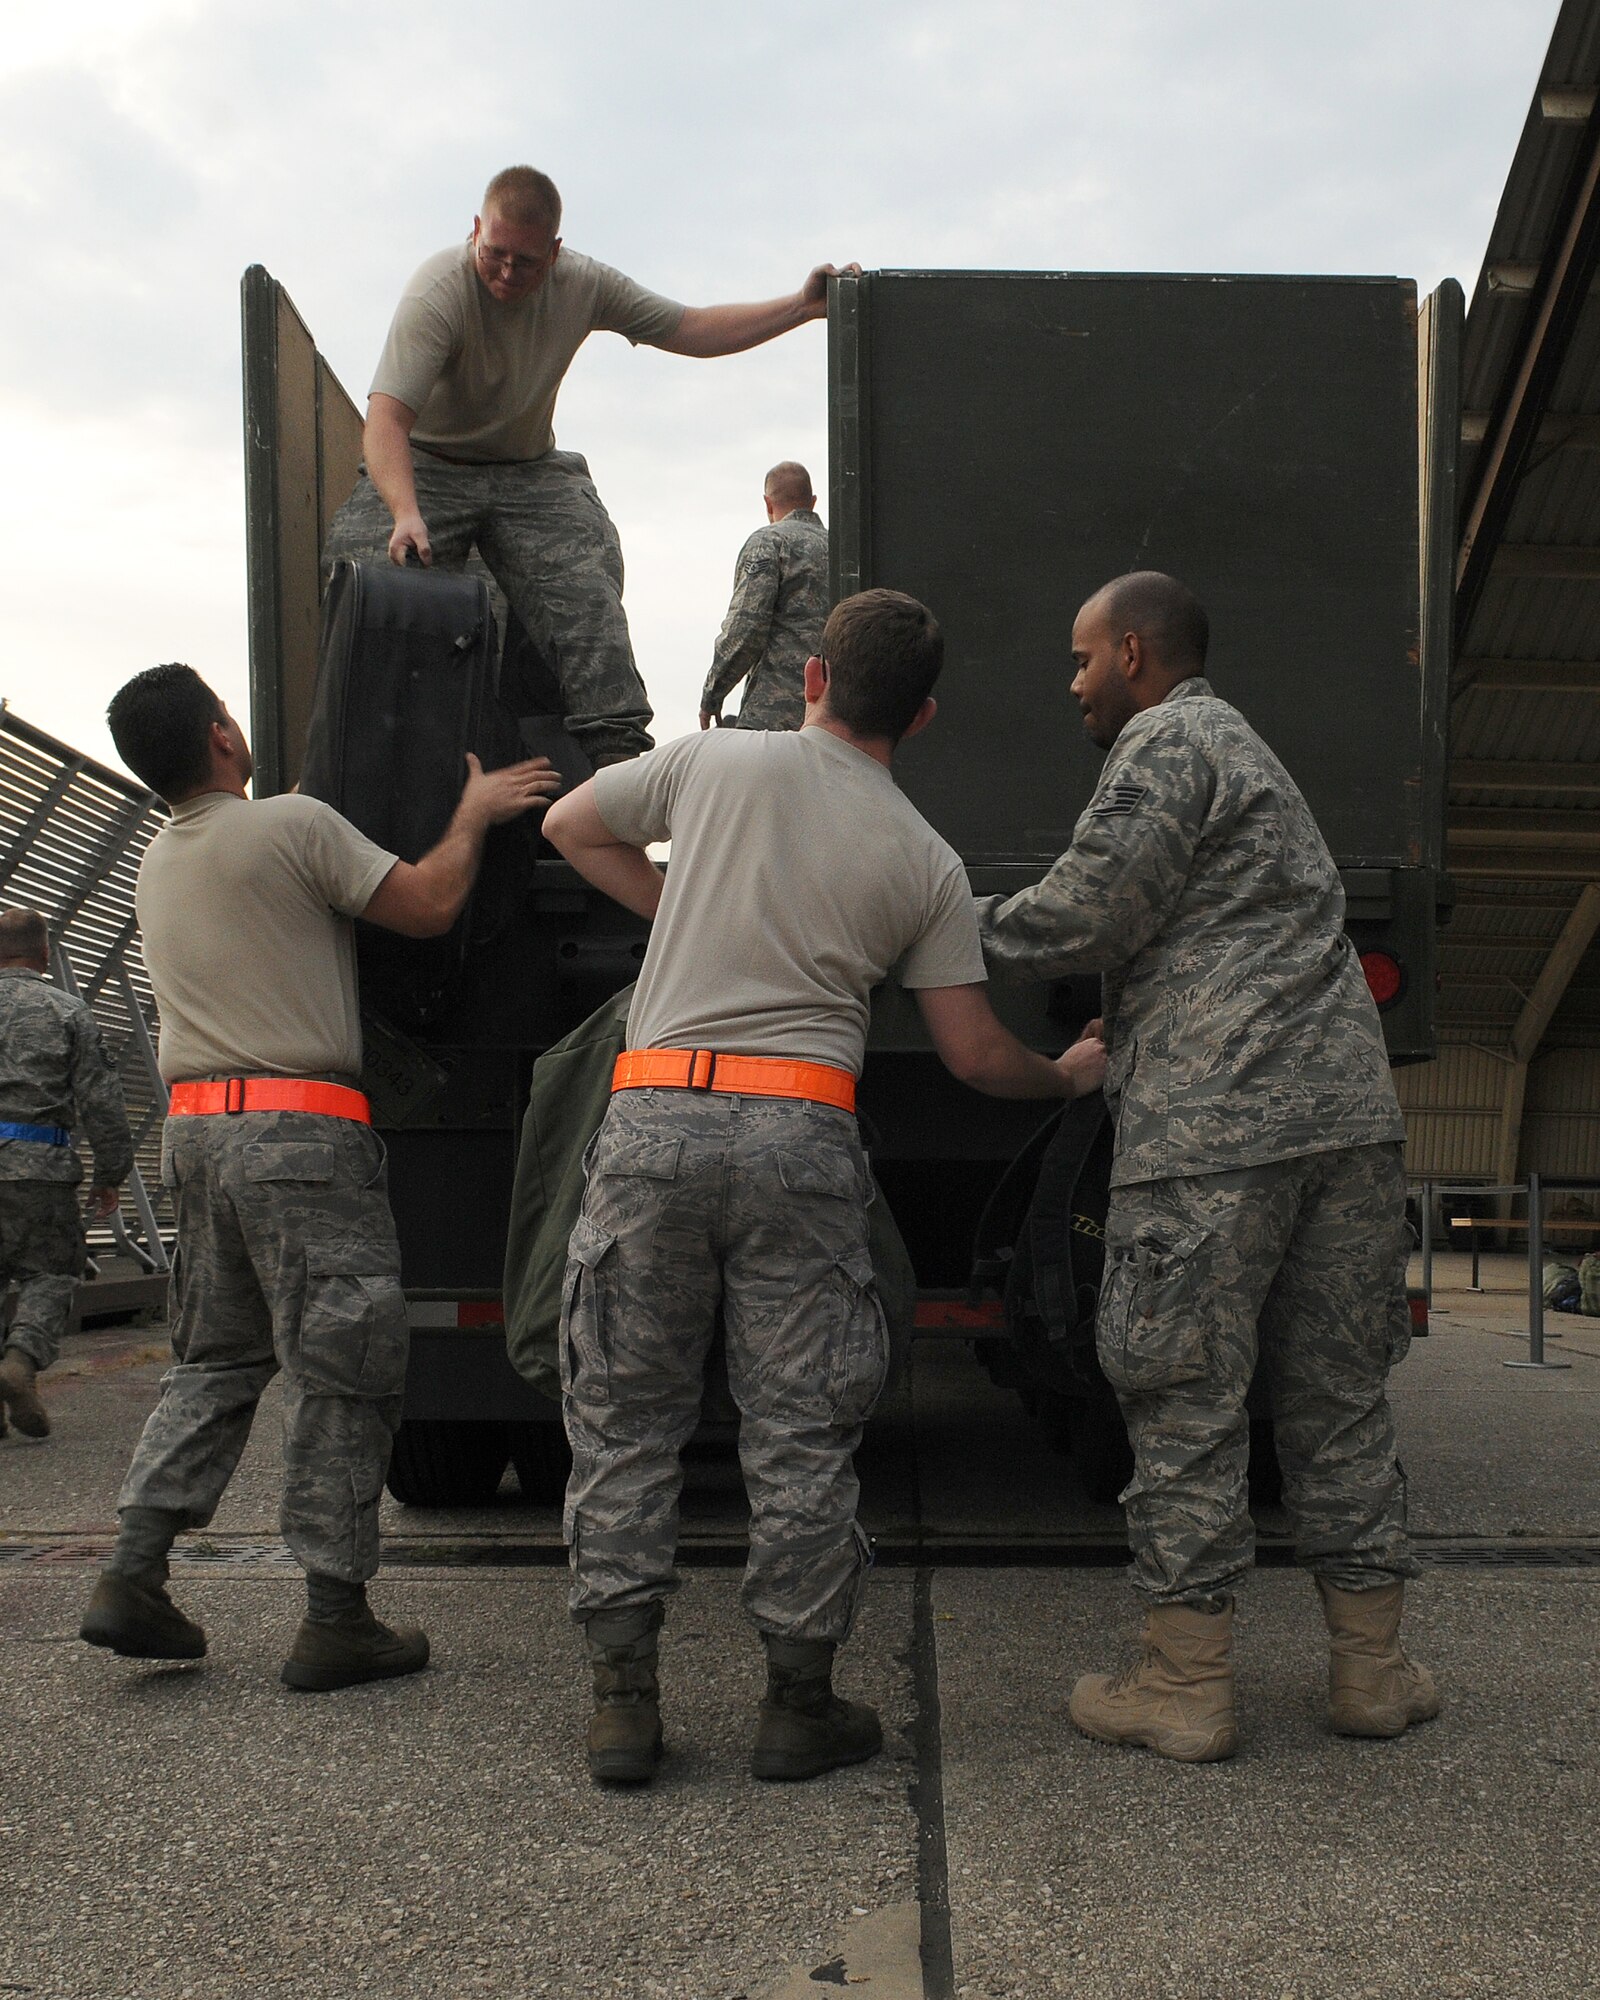 SPANGDAHLEM AIR BASE, Germany - Members of the 52nd Aircraft Maintenance Squadron unload baggage in preparation for a customs inspection Sept. 28 after returning from a four-month deployment to Joint Base Balad, Iraq. The 52nd AMXS deployed in support of the 22nd Fighter Squadron, which flew nearly 1,500 sorties and logged more than 6,000 hours of flight time in support of Operation Iraqi Freedom. (U.S. Air Force photo/Airman 1st Class Nathanael Callon)